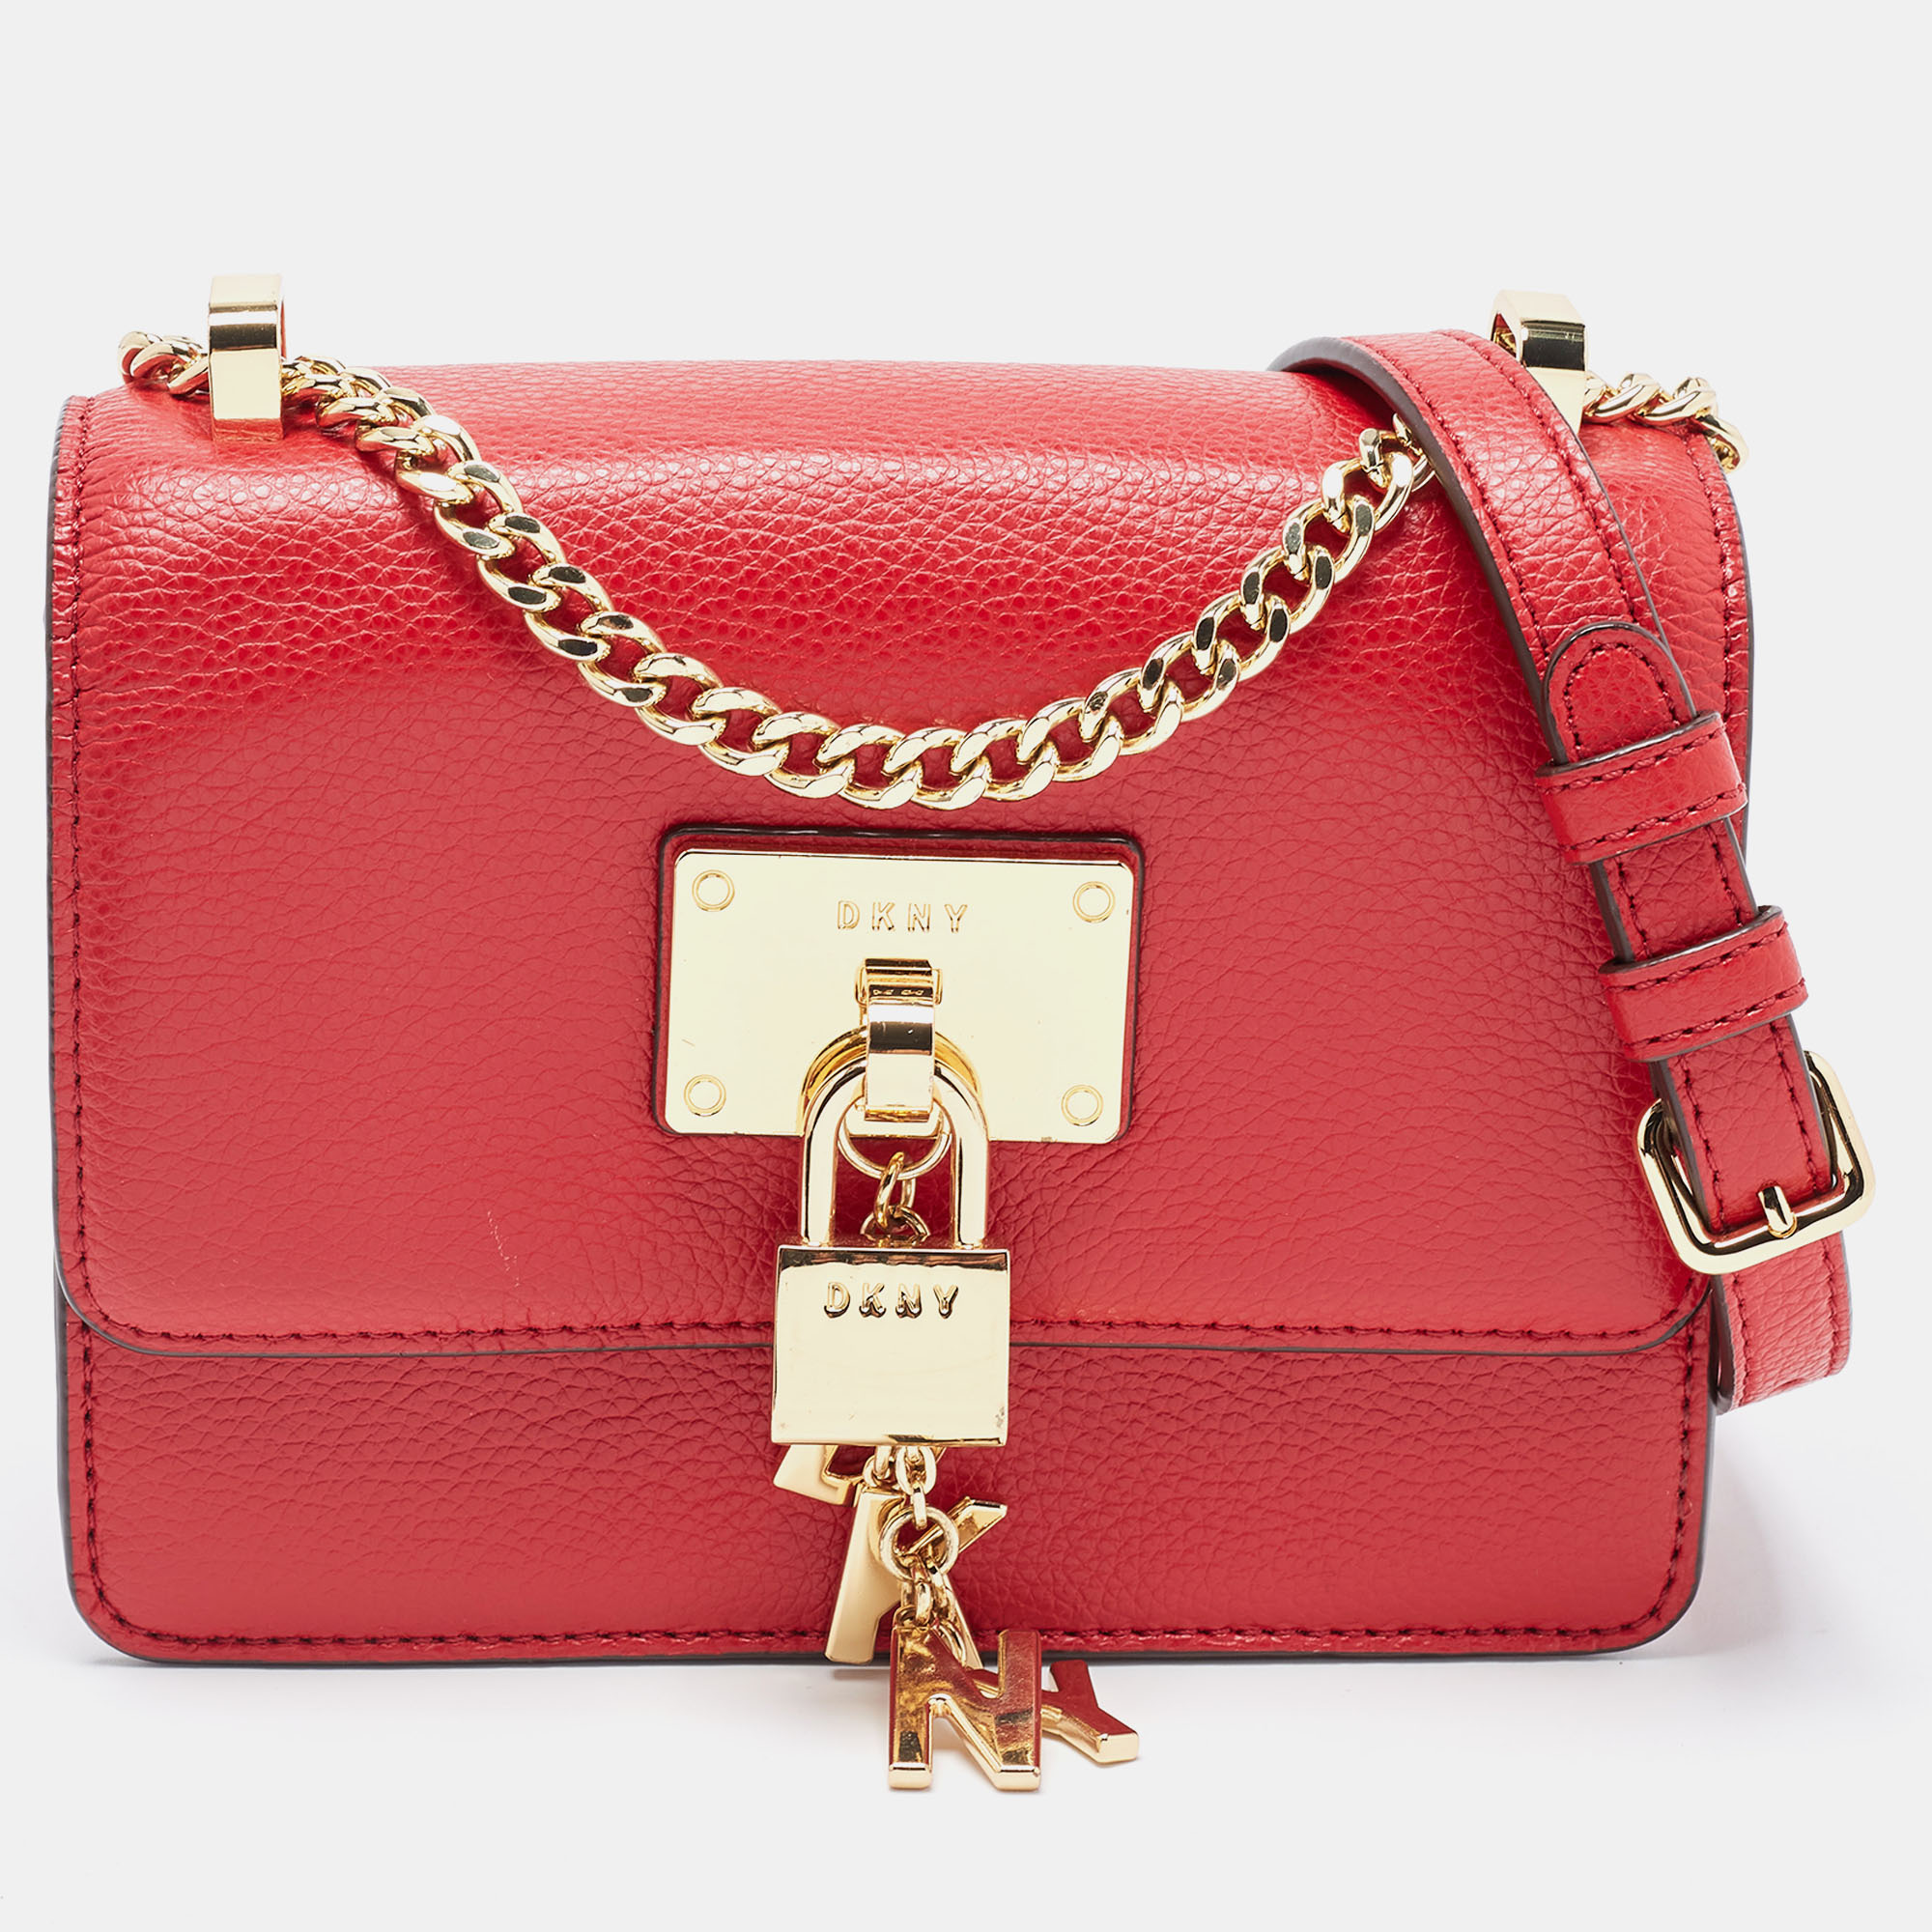 Pre-owned Dkny Red Leather Charm Flap Crossbody Bag